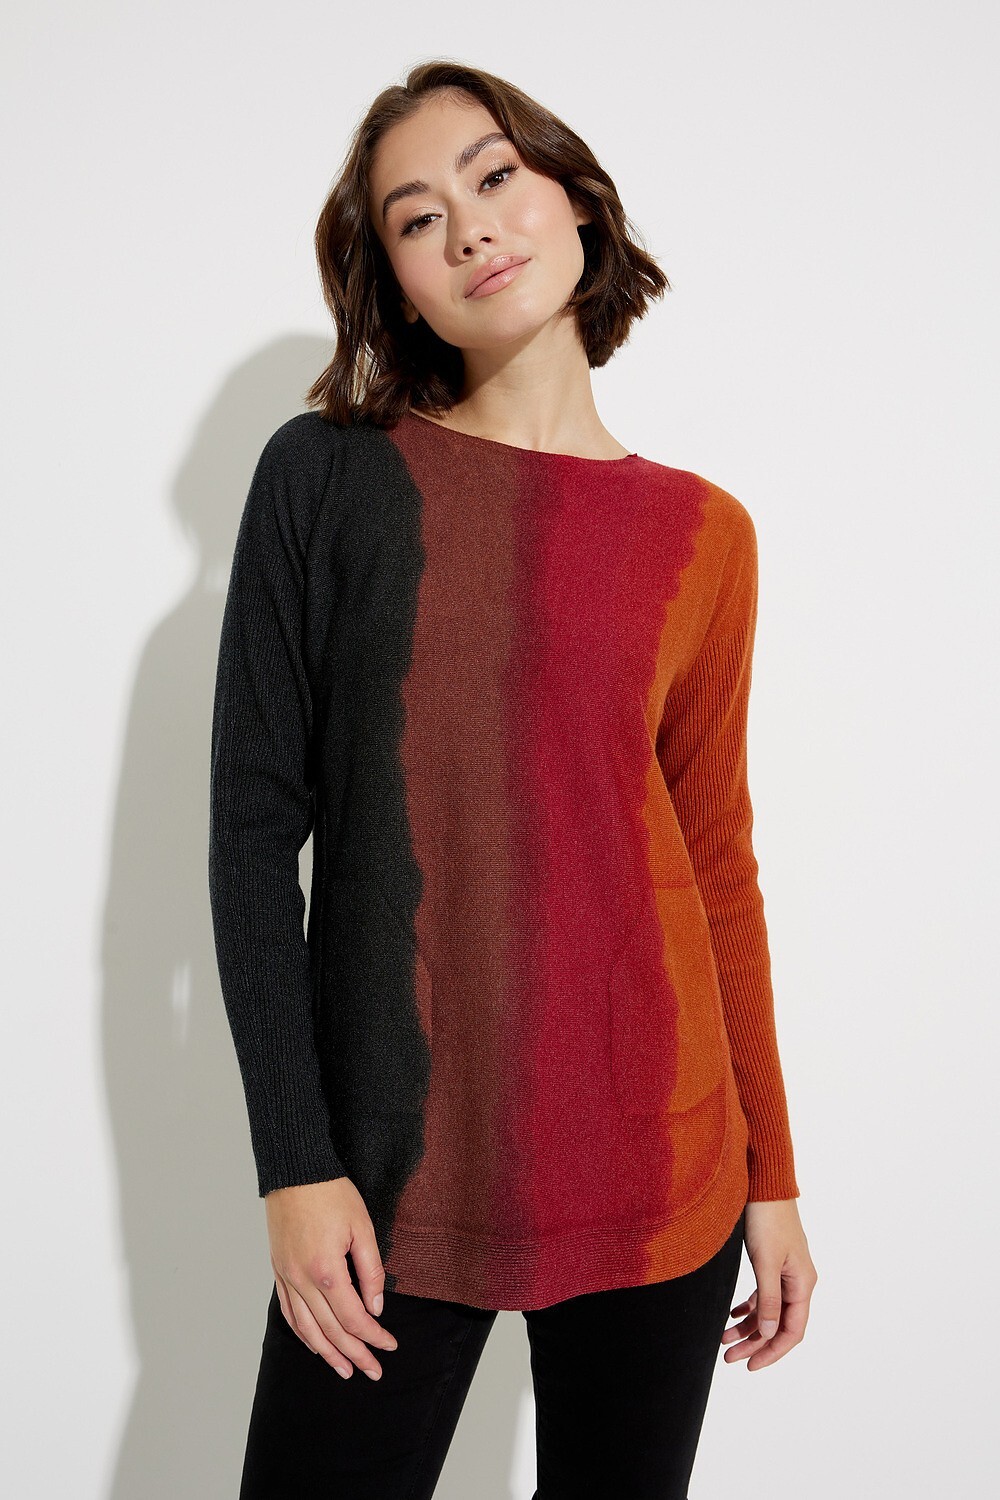 Ombre Sweater Style C2170O. Scarlet